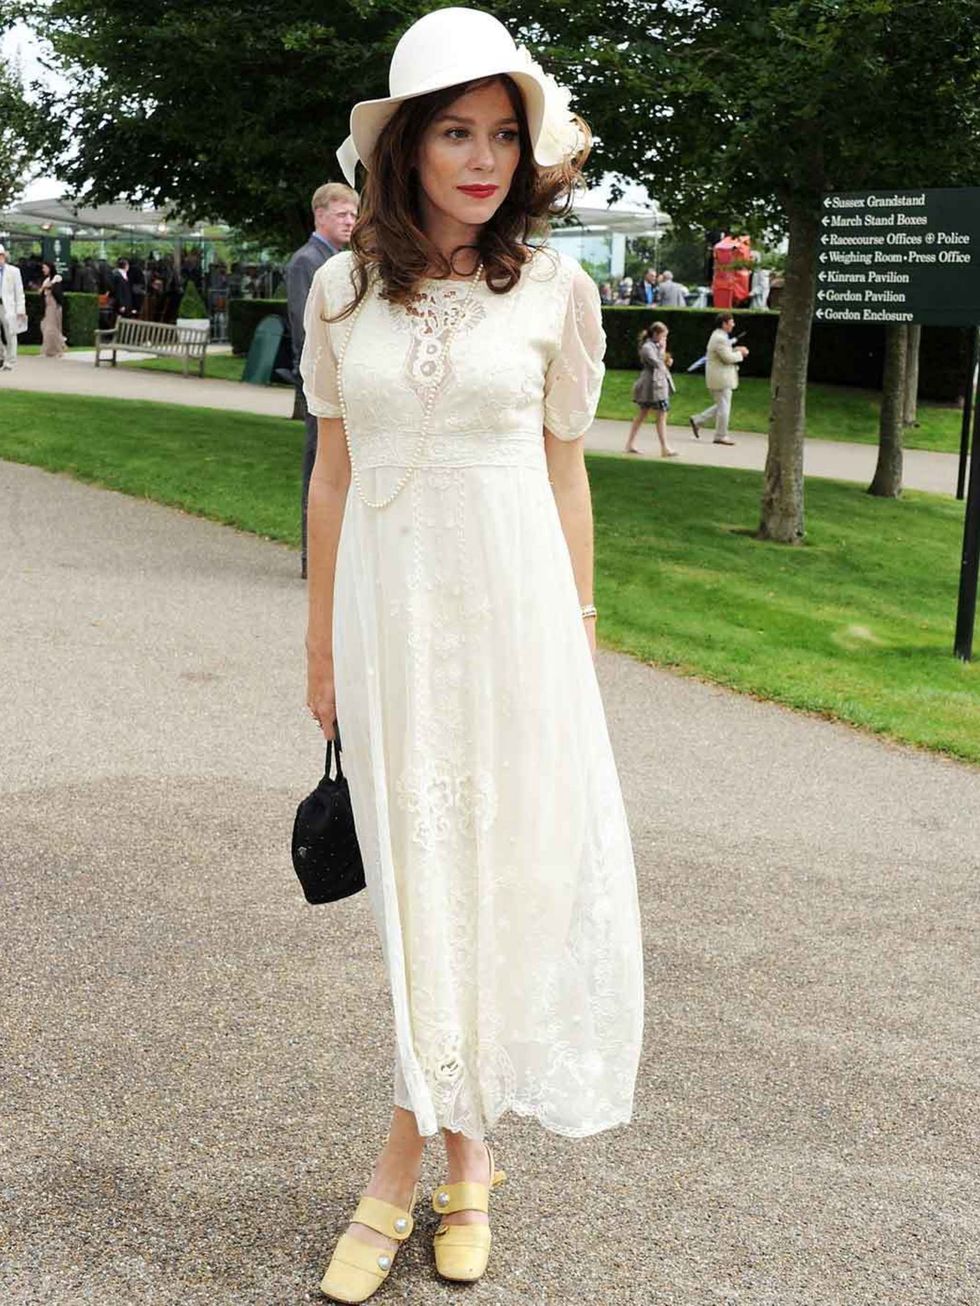 <p>Anna Friel wearing a vintage lace dress to Glorious Goodwood, August 2012</p>